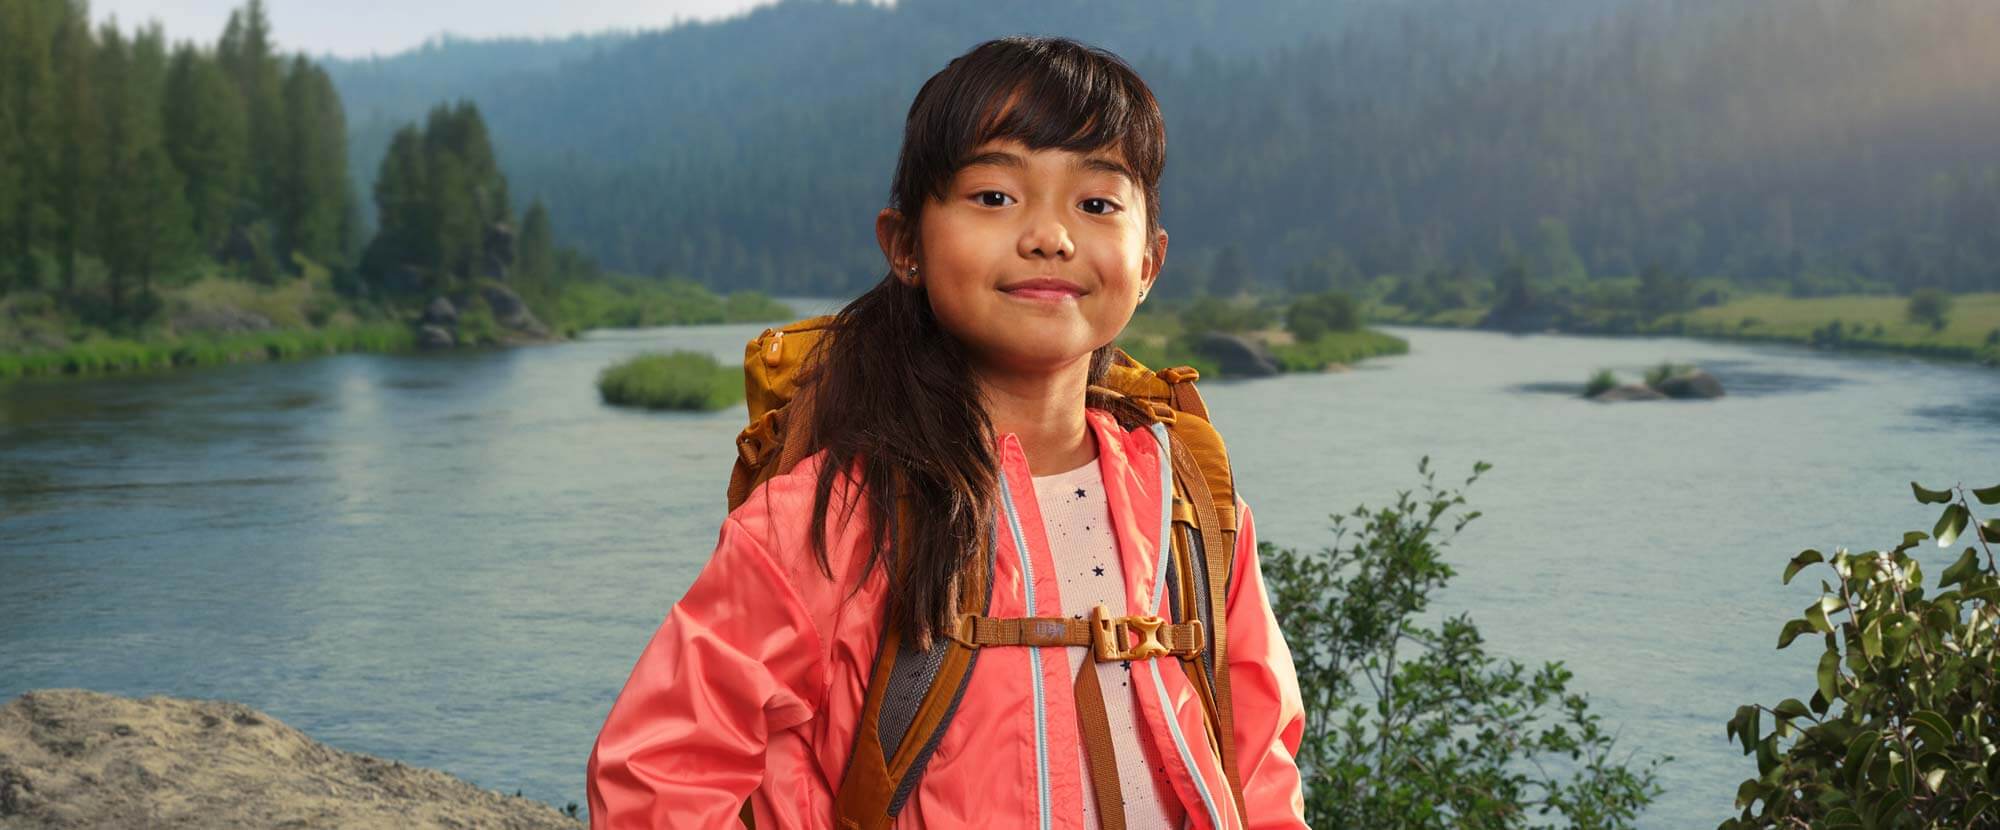 Image of an 8-year-old girl hiking